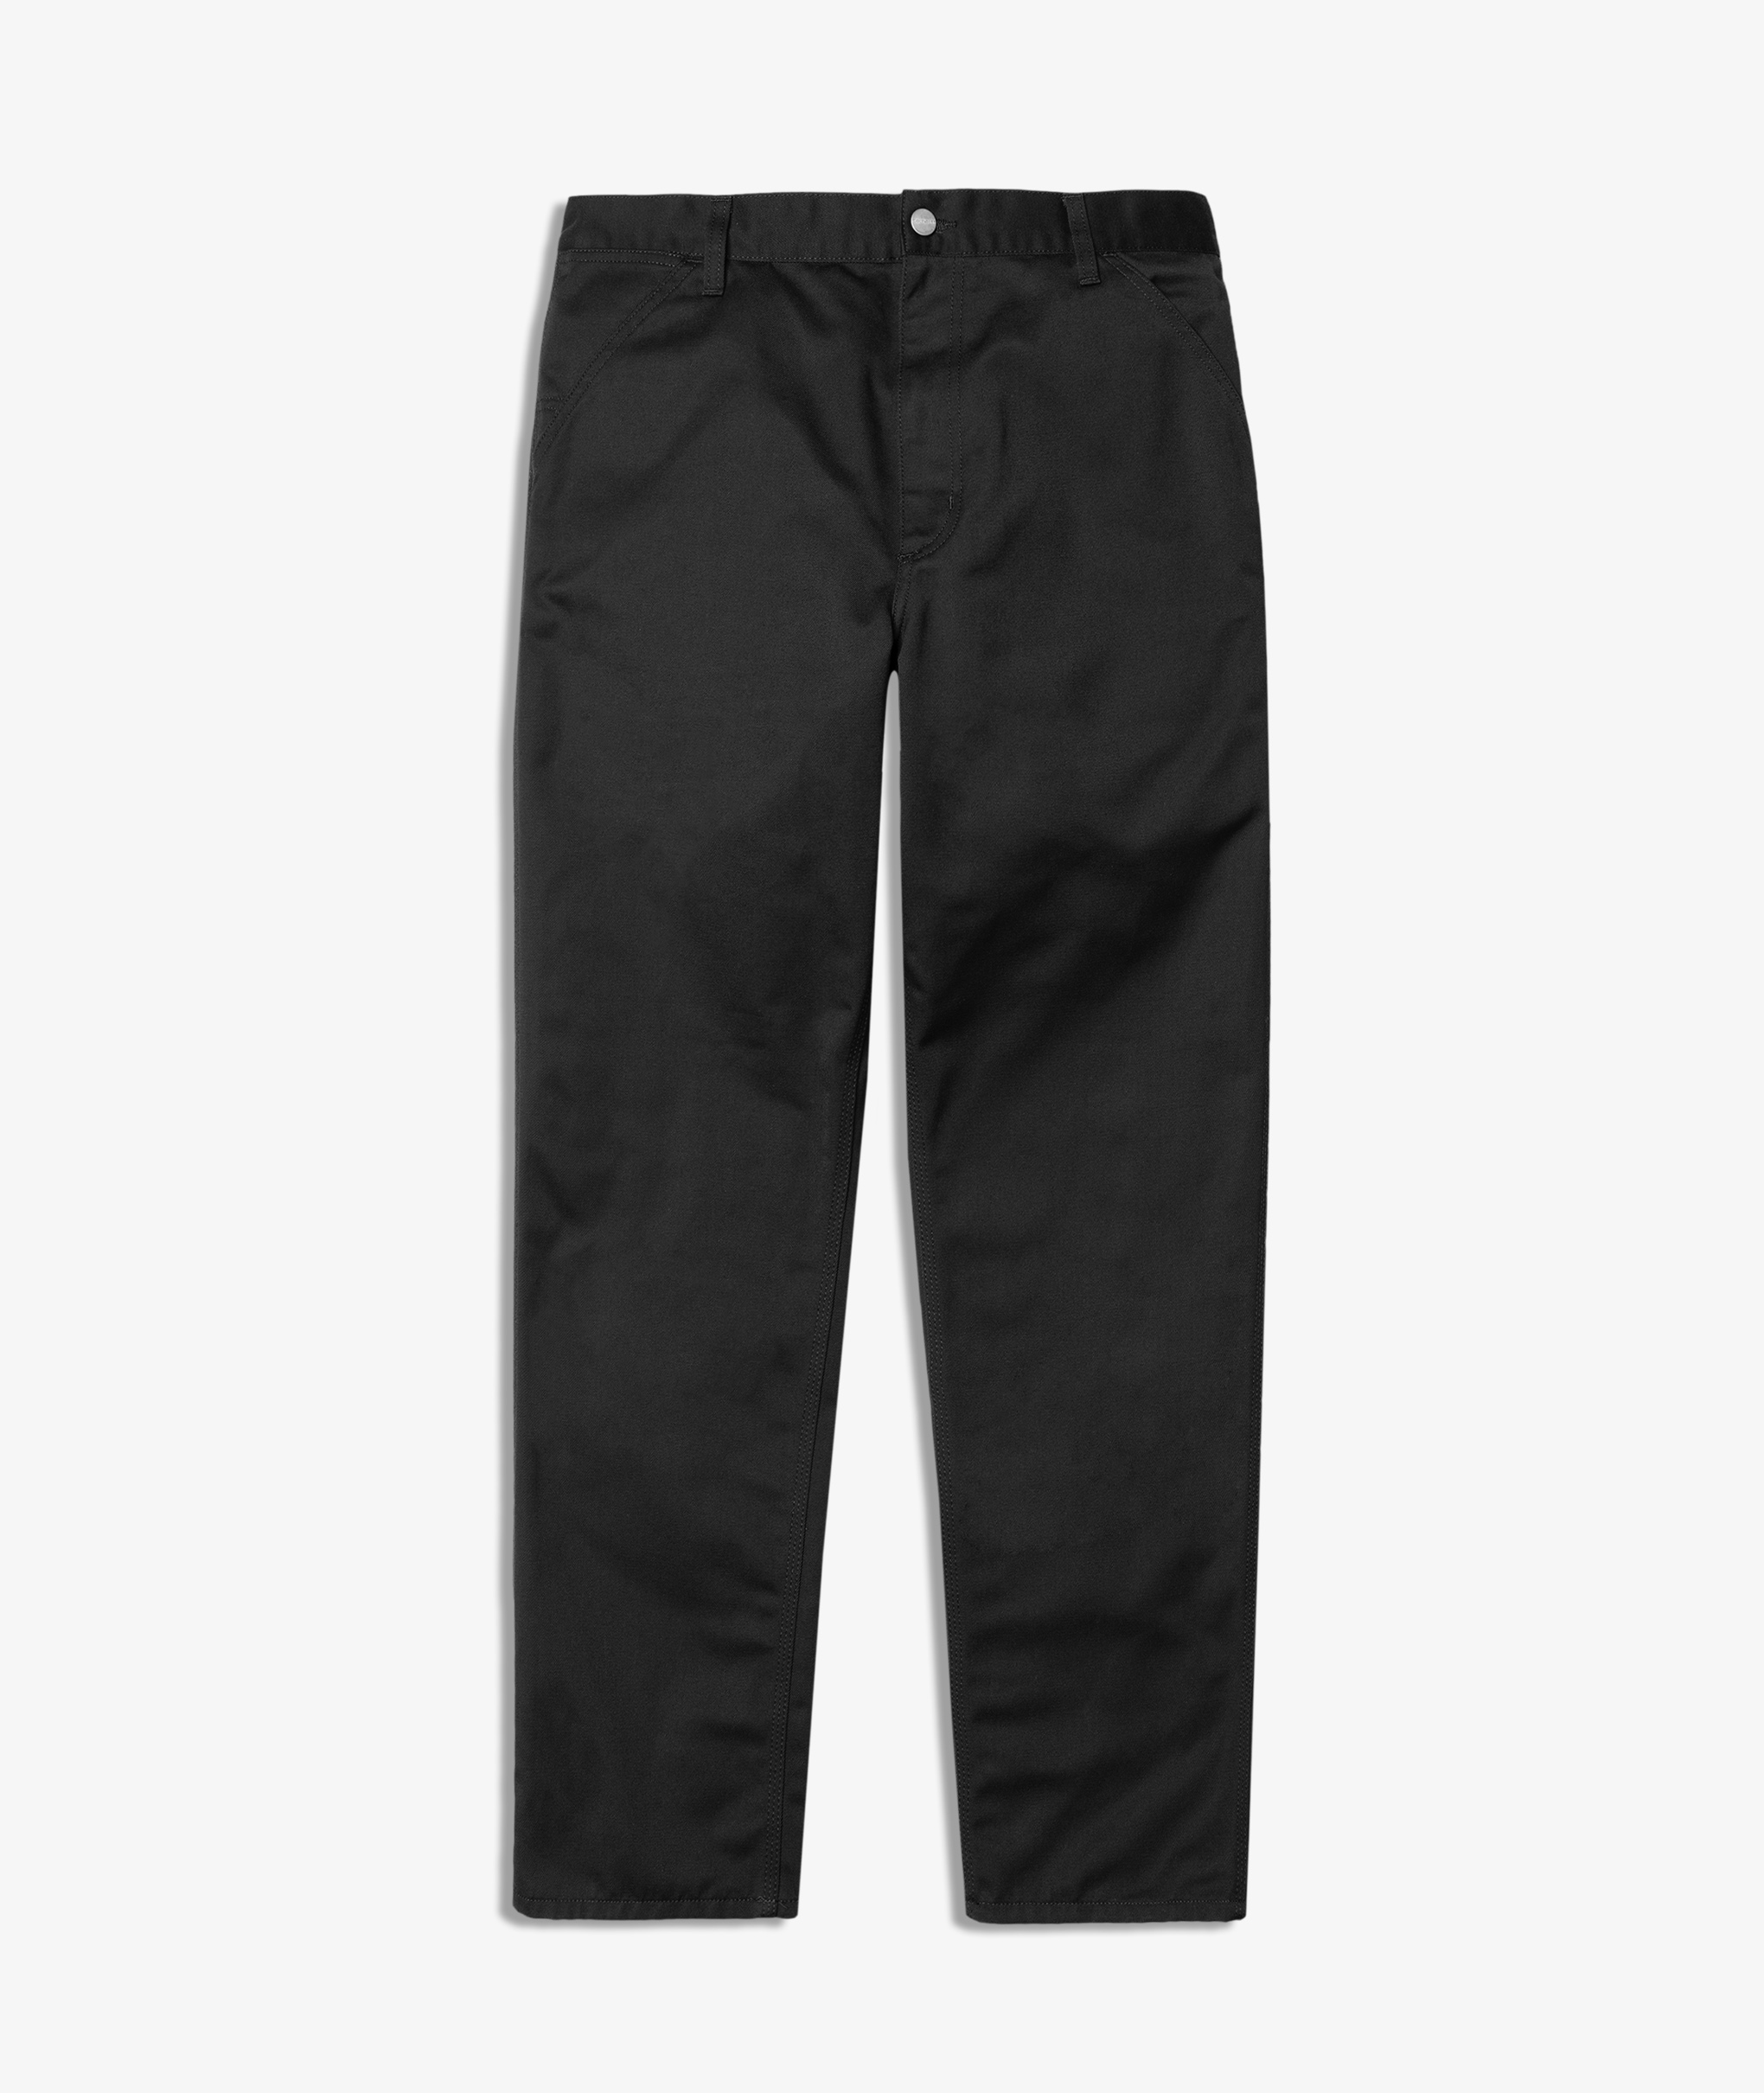 Norse Store | Shipping Worldwide - Carhartt Simple Pant - Black Rinsed